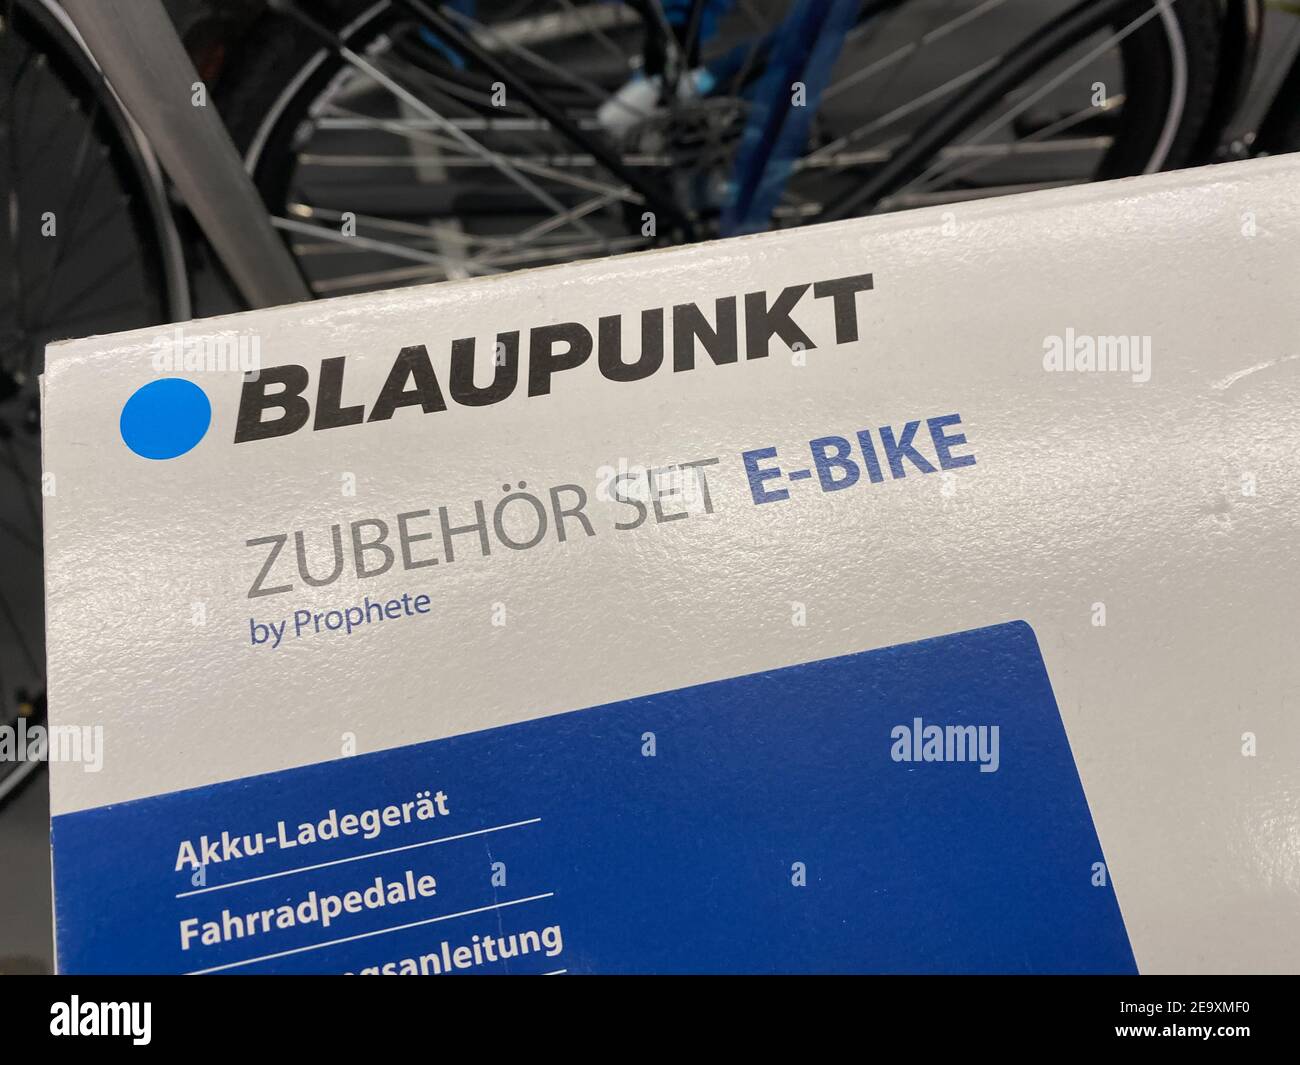 Viersen, Germany - February 3. 2021: View on carton box with Blaupunkt e-bike accessories in german supermarket Stock Photo